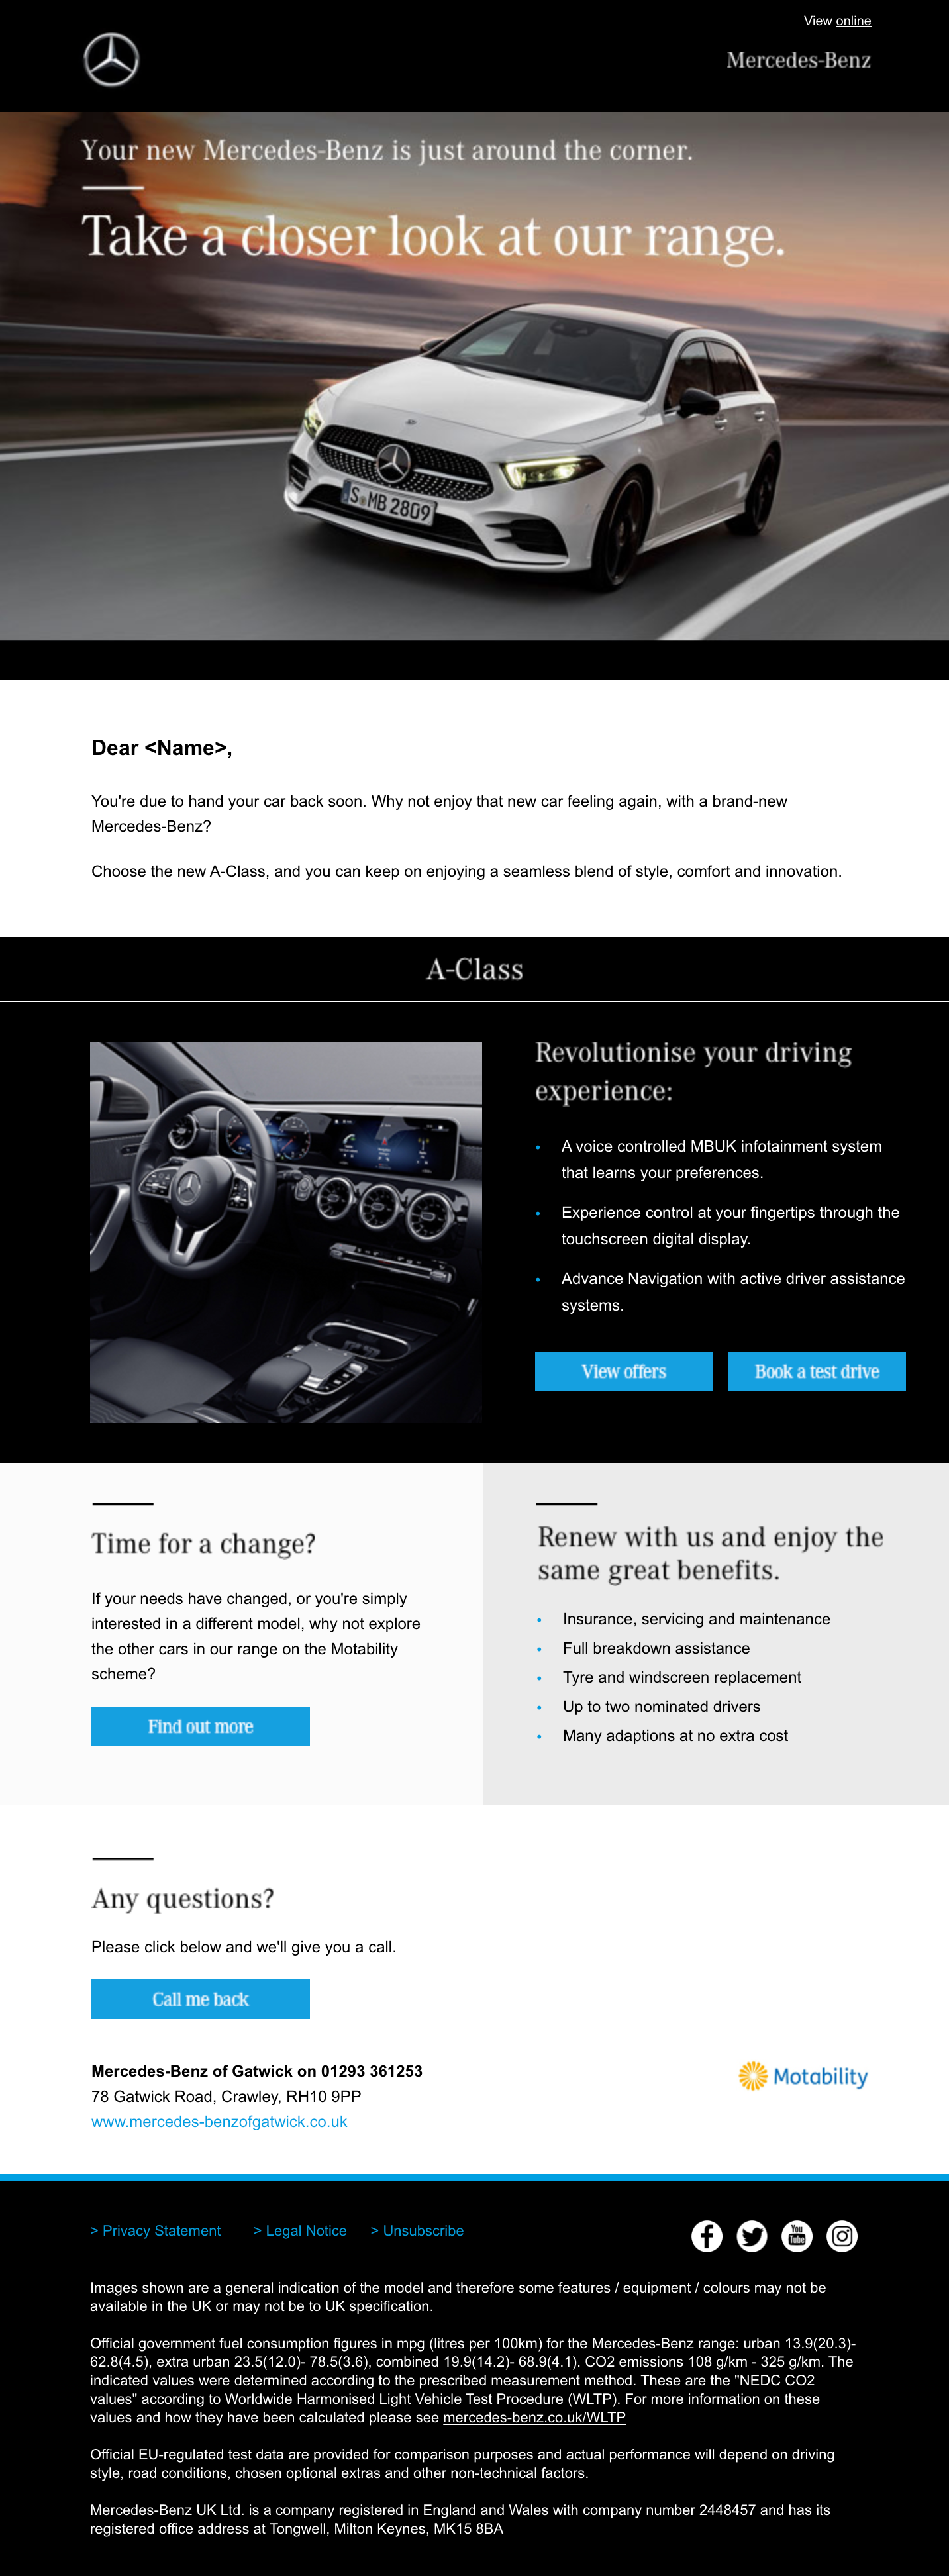 Mercedes-Benz email example